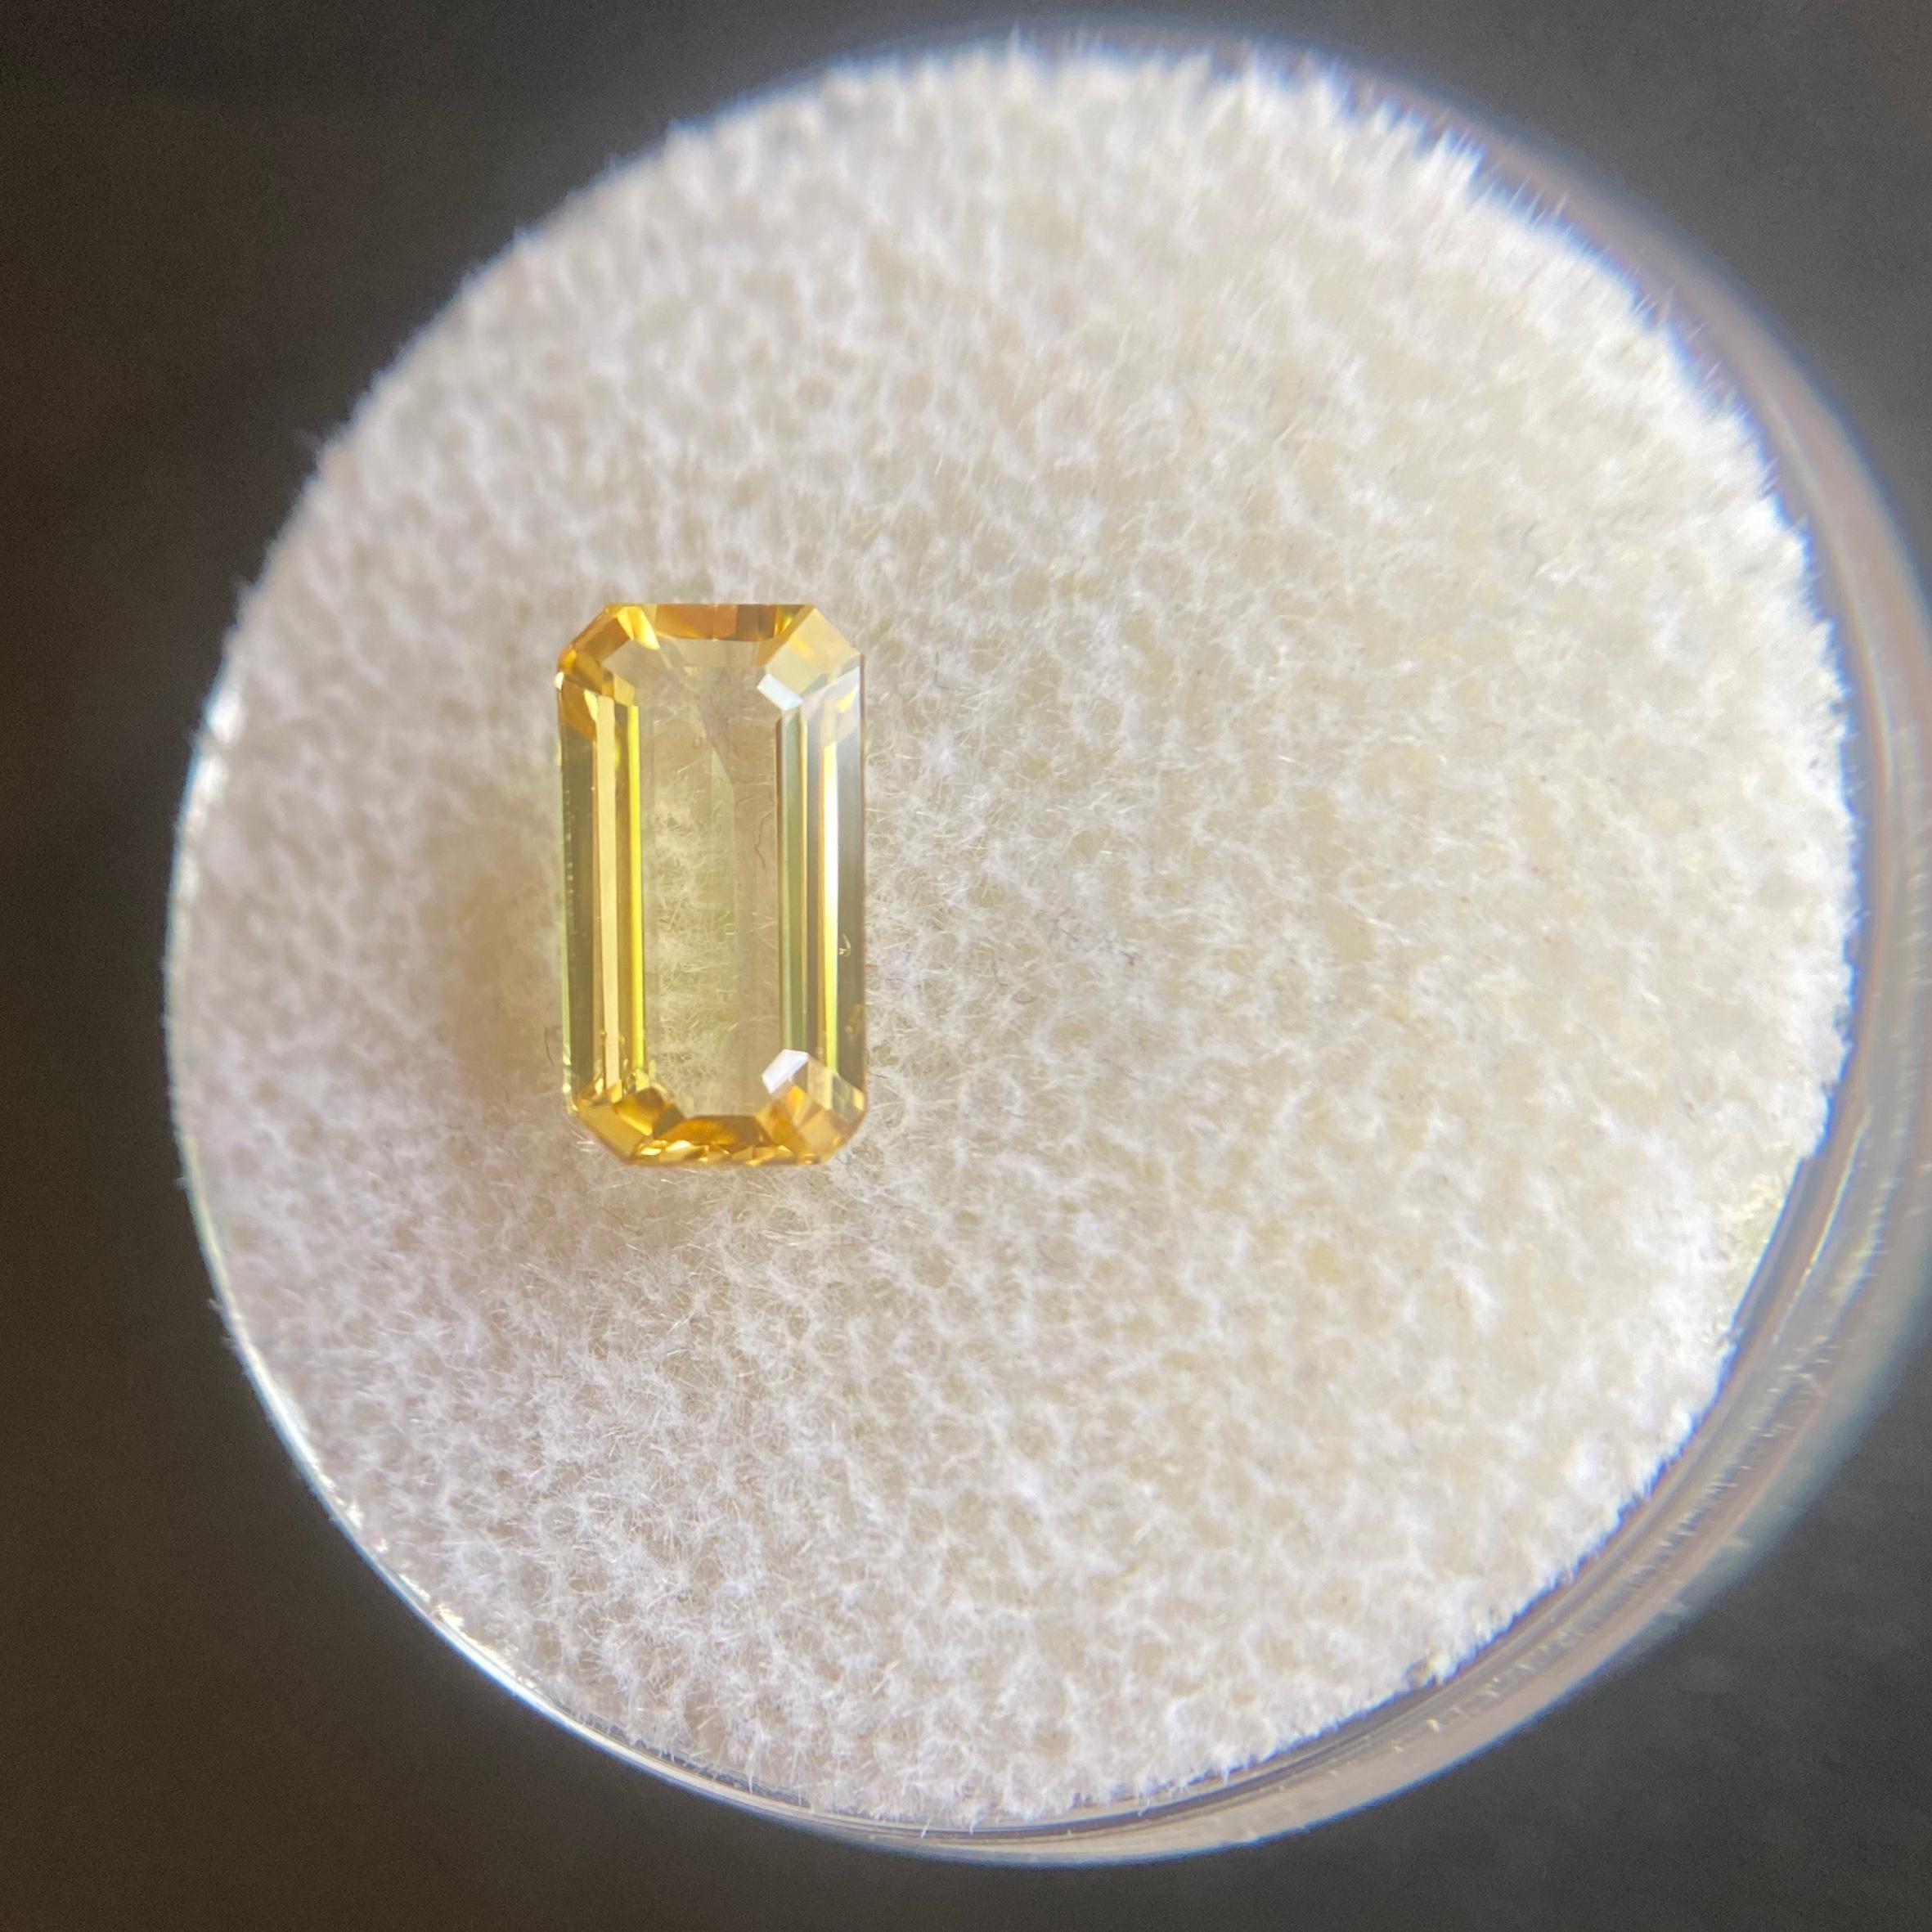 Natural Loose Ceylon Yellow Sapphire.
1.31 carat stone, with an excellent emerald cut and a bright vivid yellow colour. 

Fully certified by IGI in Antwerp, one of their best and most well equipped gem labs.
The sapphire has excellent clarity with